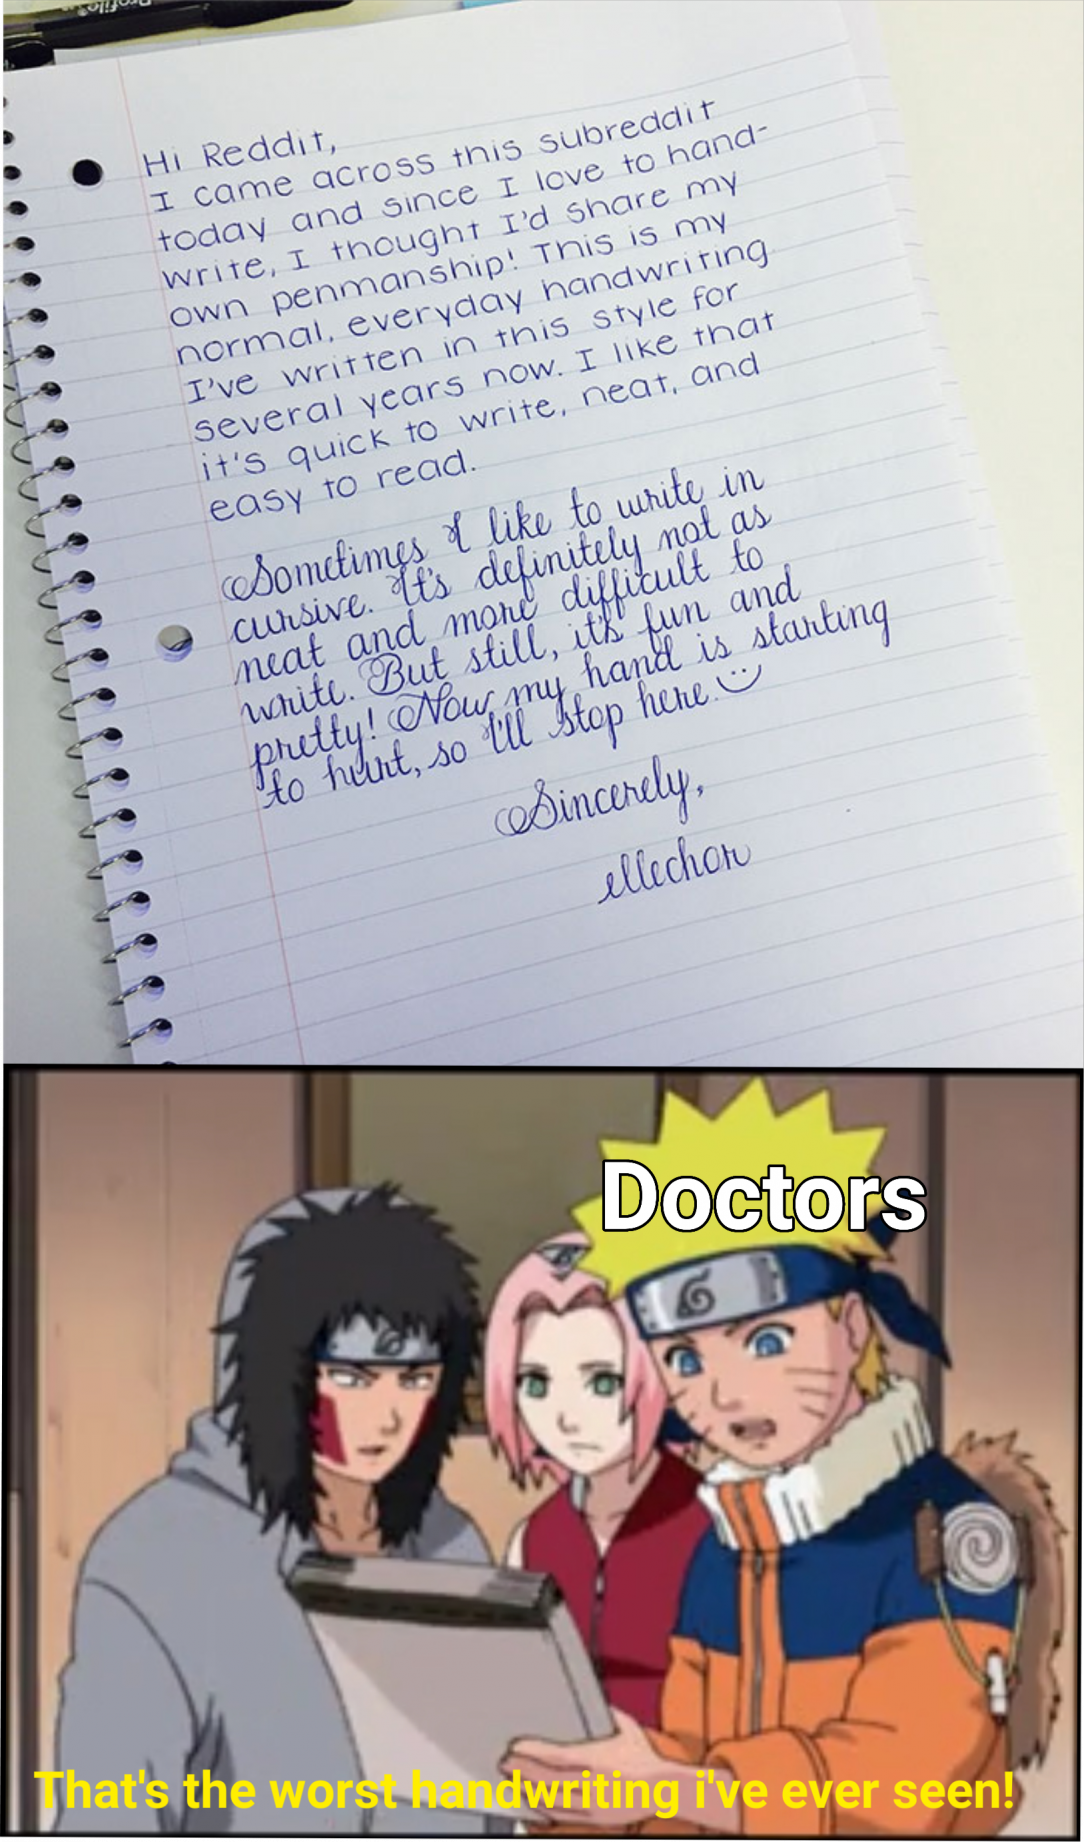 Only doctors can read other doctors handwriting